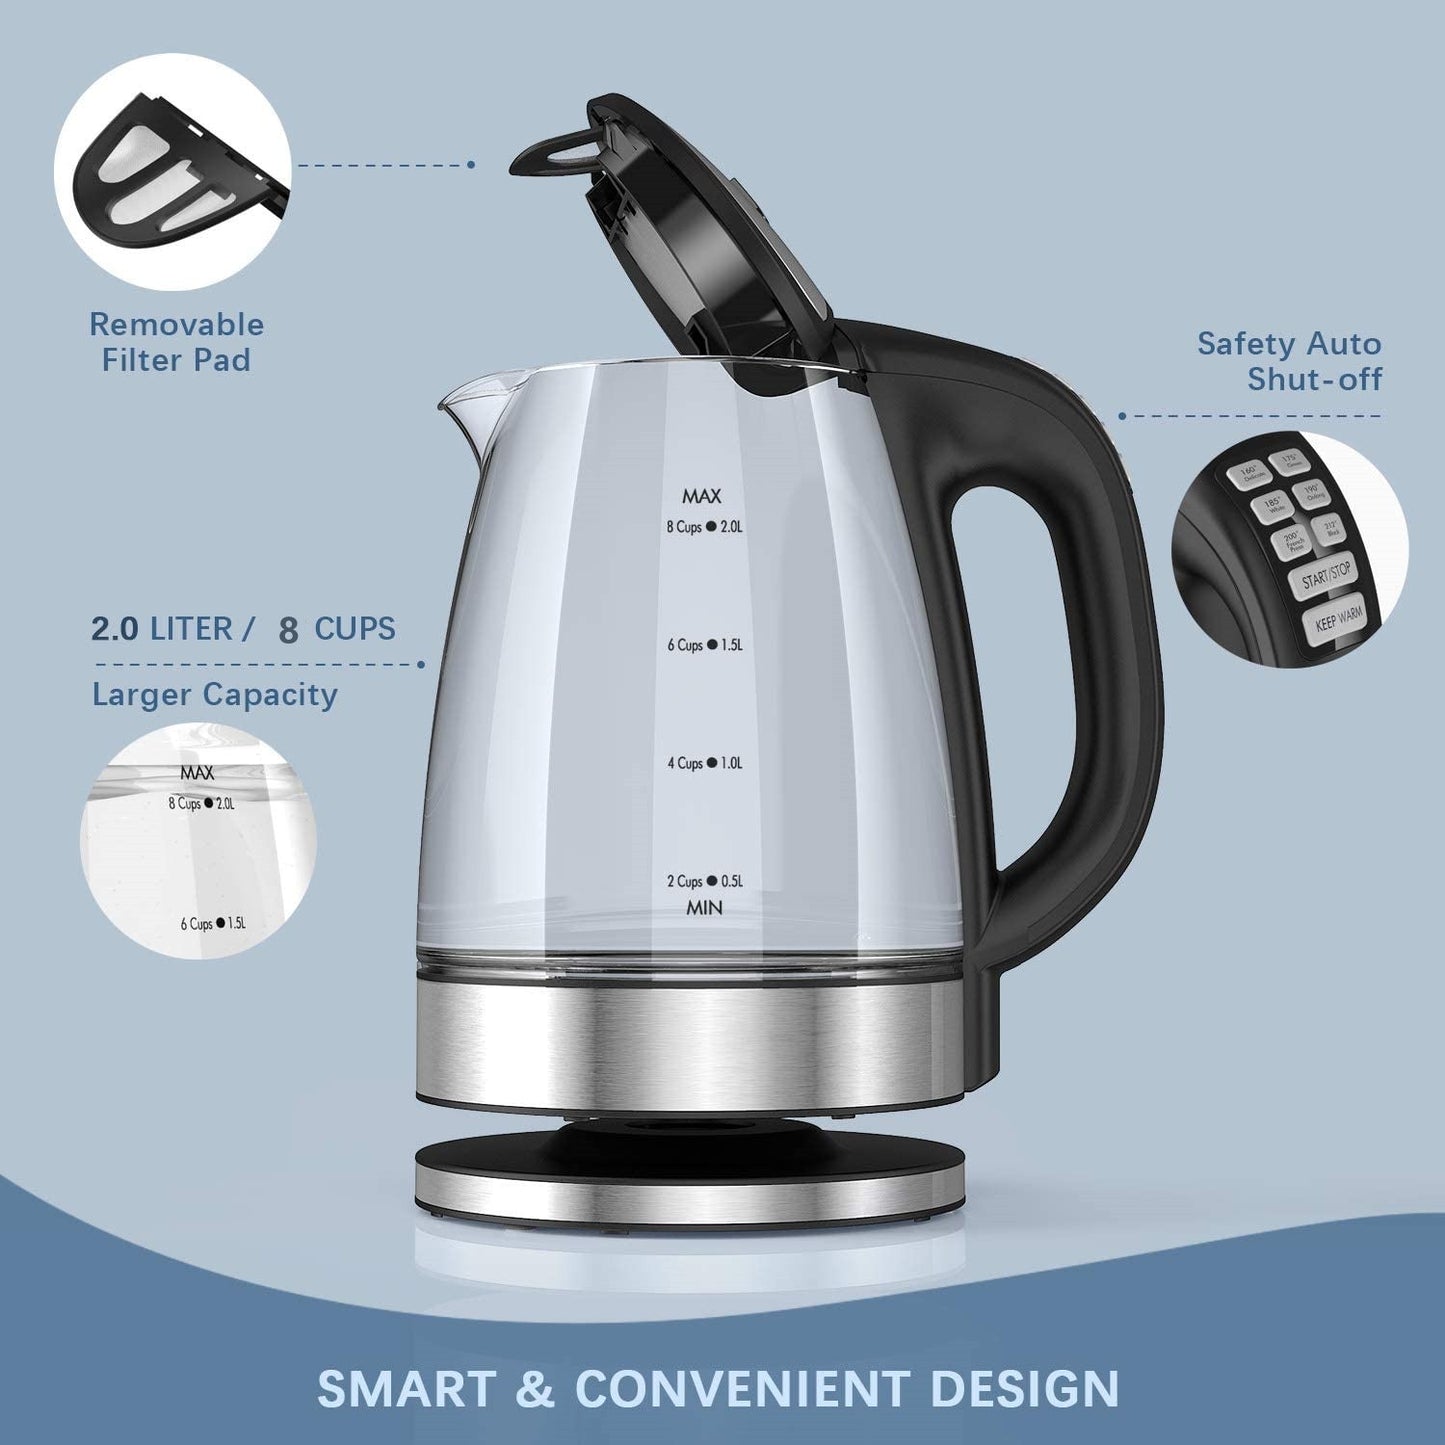 DEVISIB Electric Kettle Temperature Control with 6 Presets 2.0L Glass Making Tea Coffee Hot Water Auto-Off Boil-Dry Protection